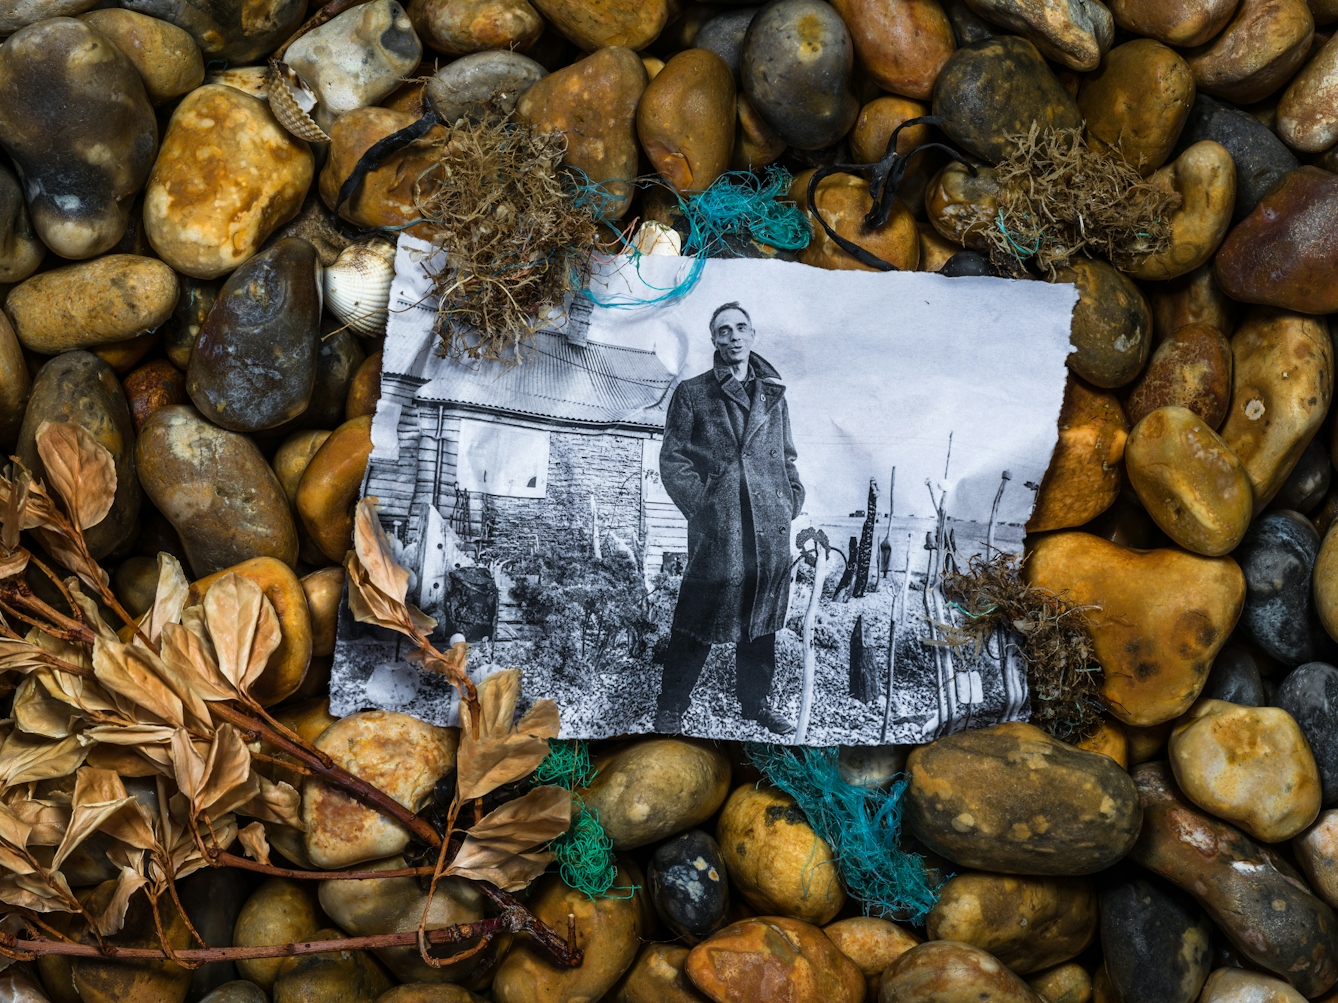 Photograph of a shingle beach made up of pebbles of all different sizes and shapes with a mix of brown and yellow hues. Nestled in the pebbles is a black and white photographic print, soaked in sea water such that it has taken on the shape of the stones beneath. The print show Derek Jarman standing in front of his Dungeness cottage, hands in the pockets of his think woollen coat, mouth in mid speech. Surrounding the print on the stones are sea shells, sprigs of beachfront vegetation and the frayed blue and green nylon threads of fishing nets.